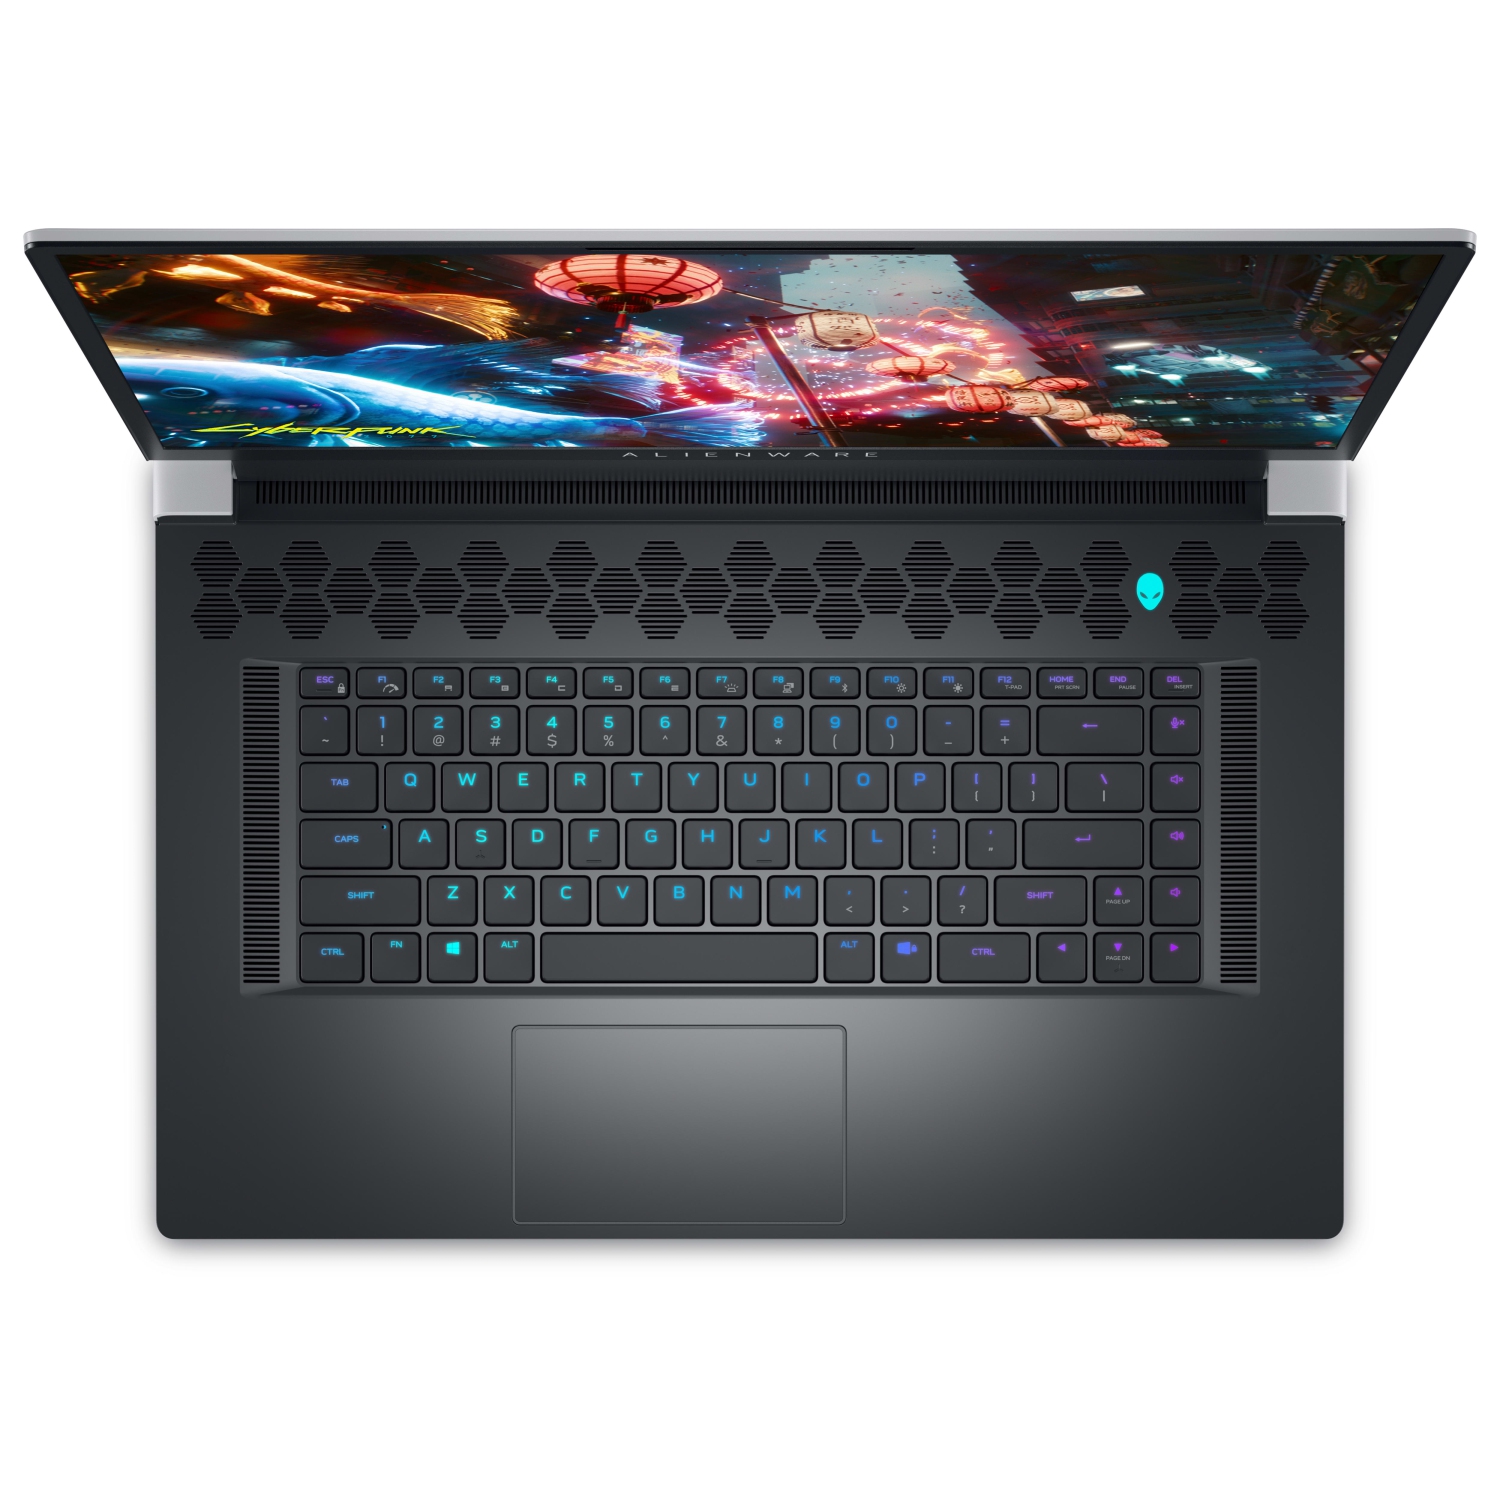 Refurbished (Excellent) – Dell Alienware X17 R2 Gaming Laptop (2022) | 17.3" FHD | Core i9 - 1TB SSD - 16GB RAM - 3080 Ti | 14 Cores @ 5 GHz - 12th Gen CPU - 16GB GDDR6X